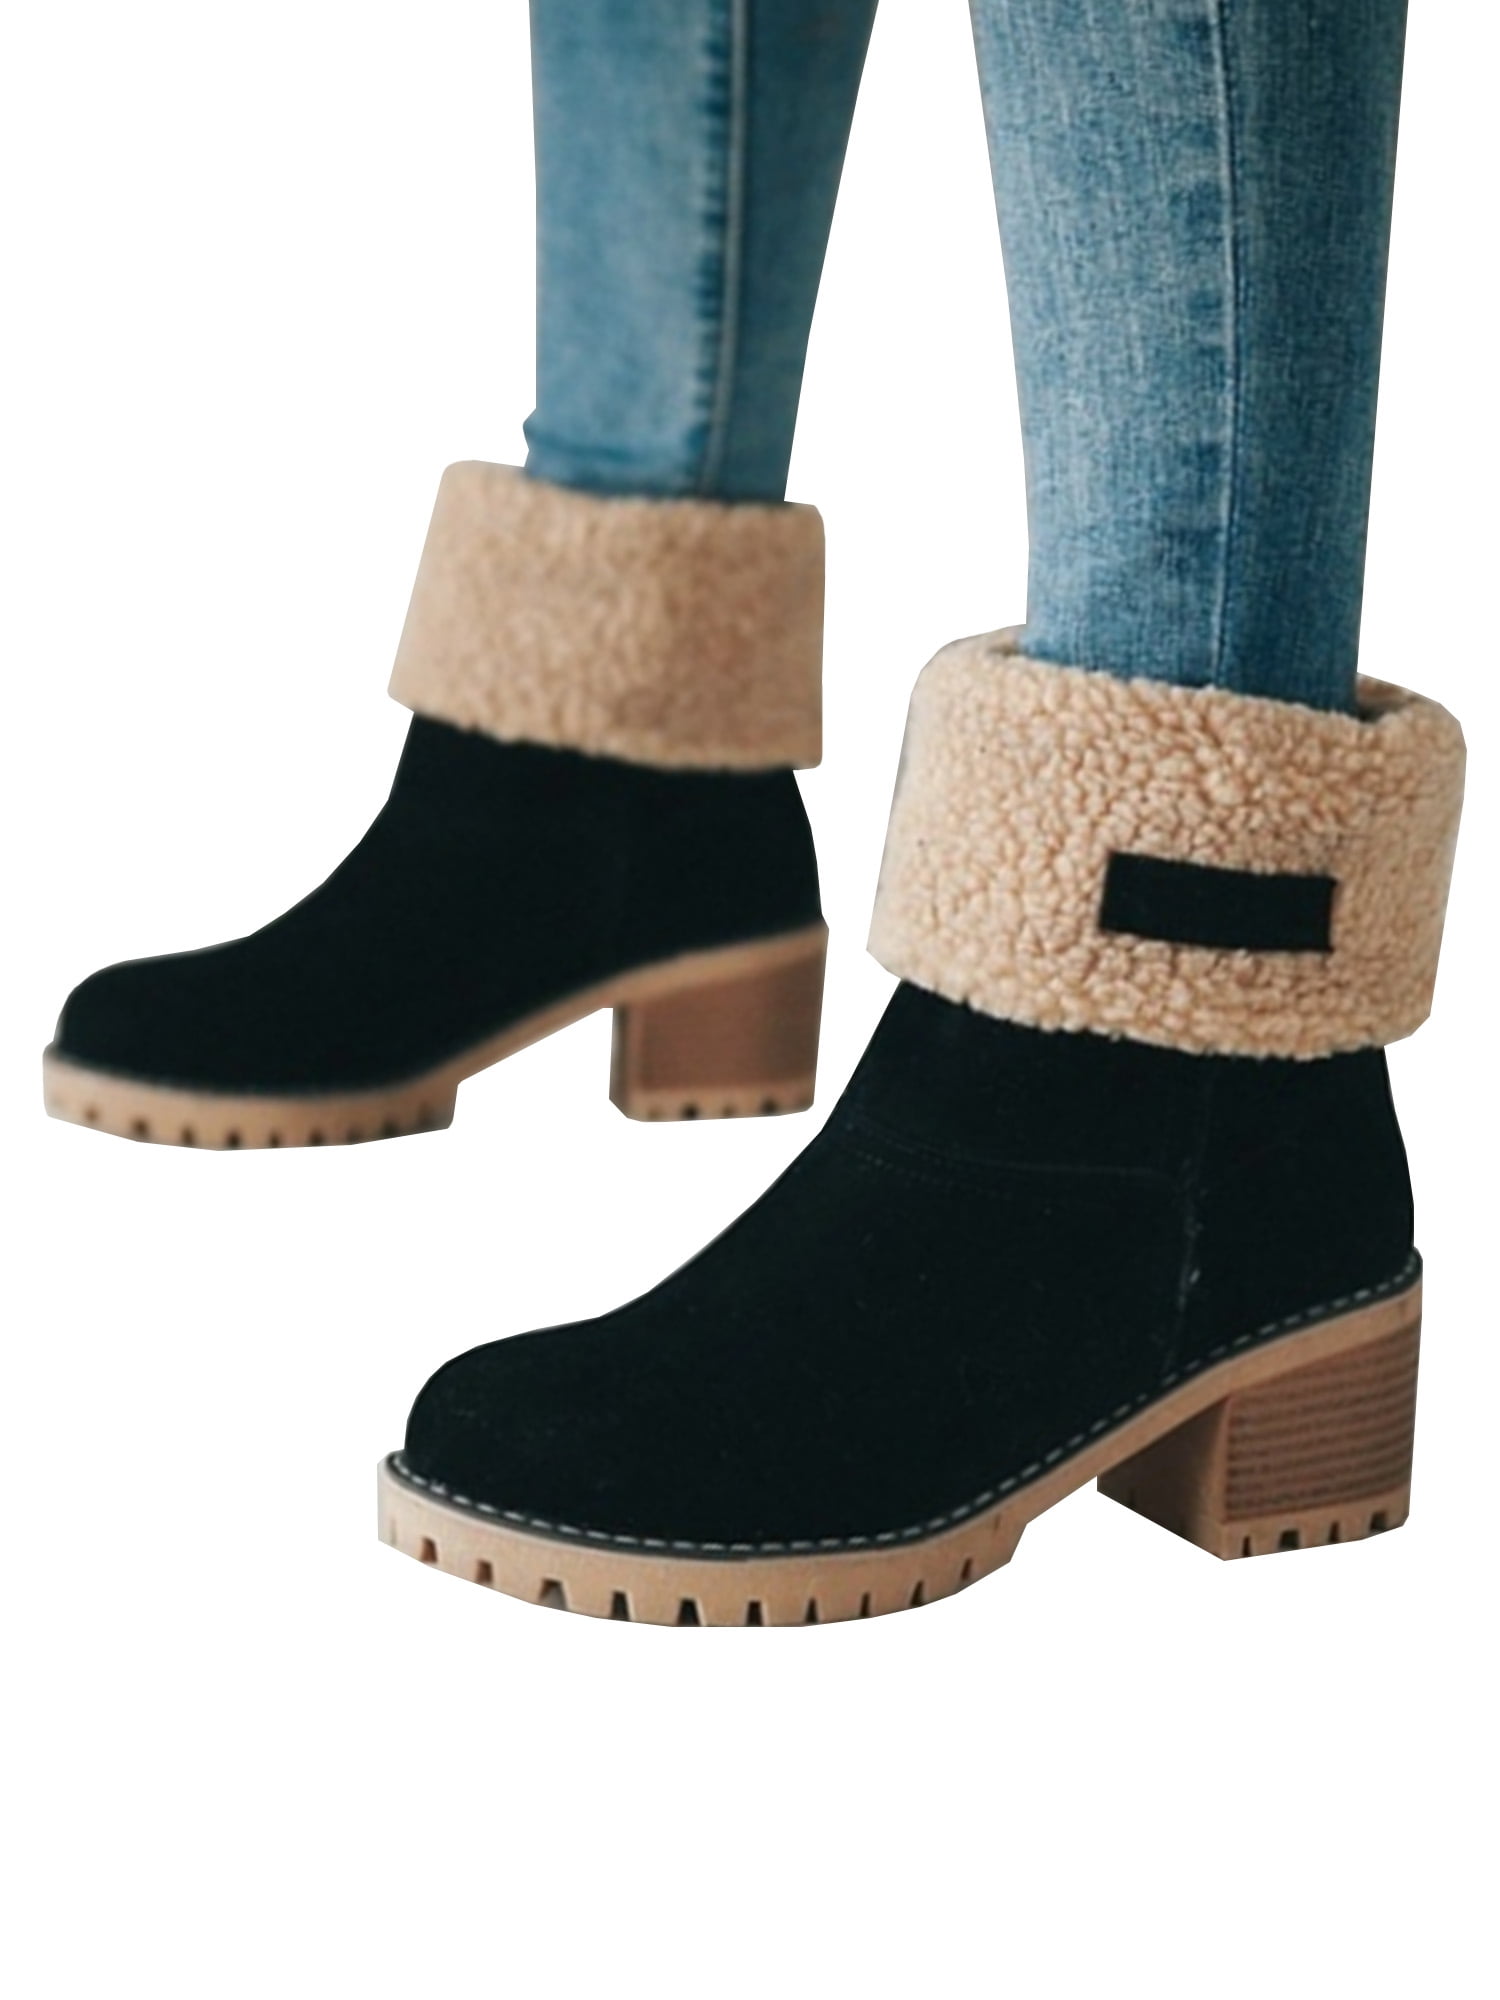 Women Ladies Ankle Boots Faux Fur Lined Chunky Block Heel Snow Boots Shoes Size 